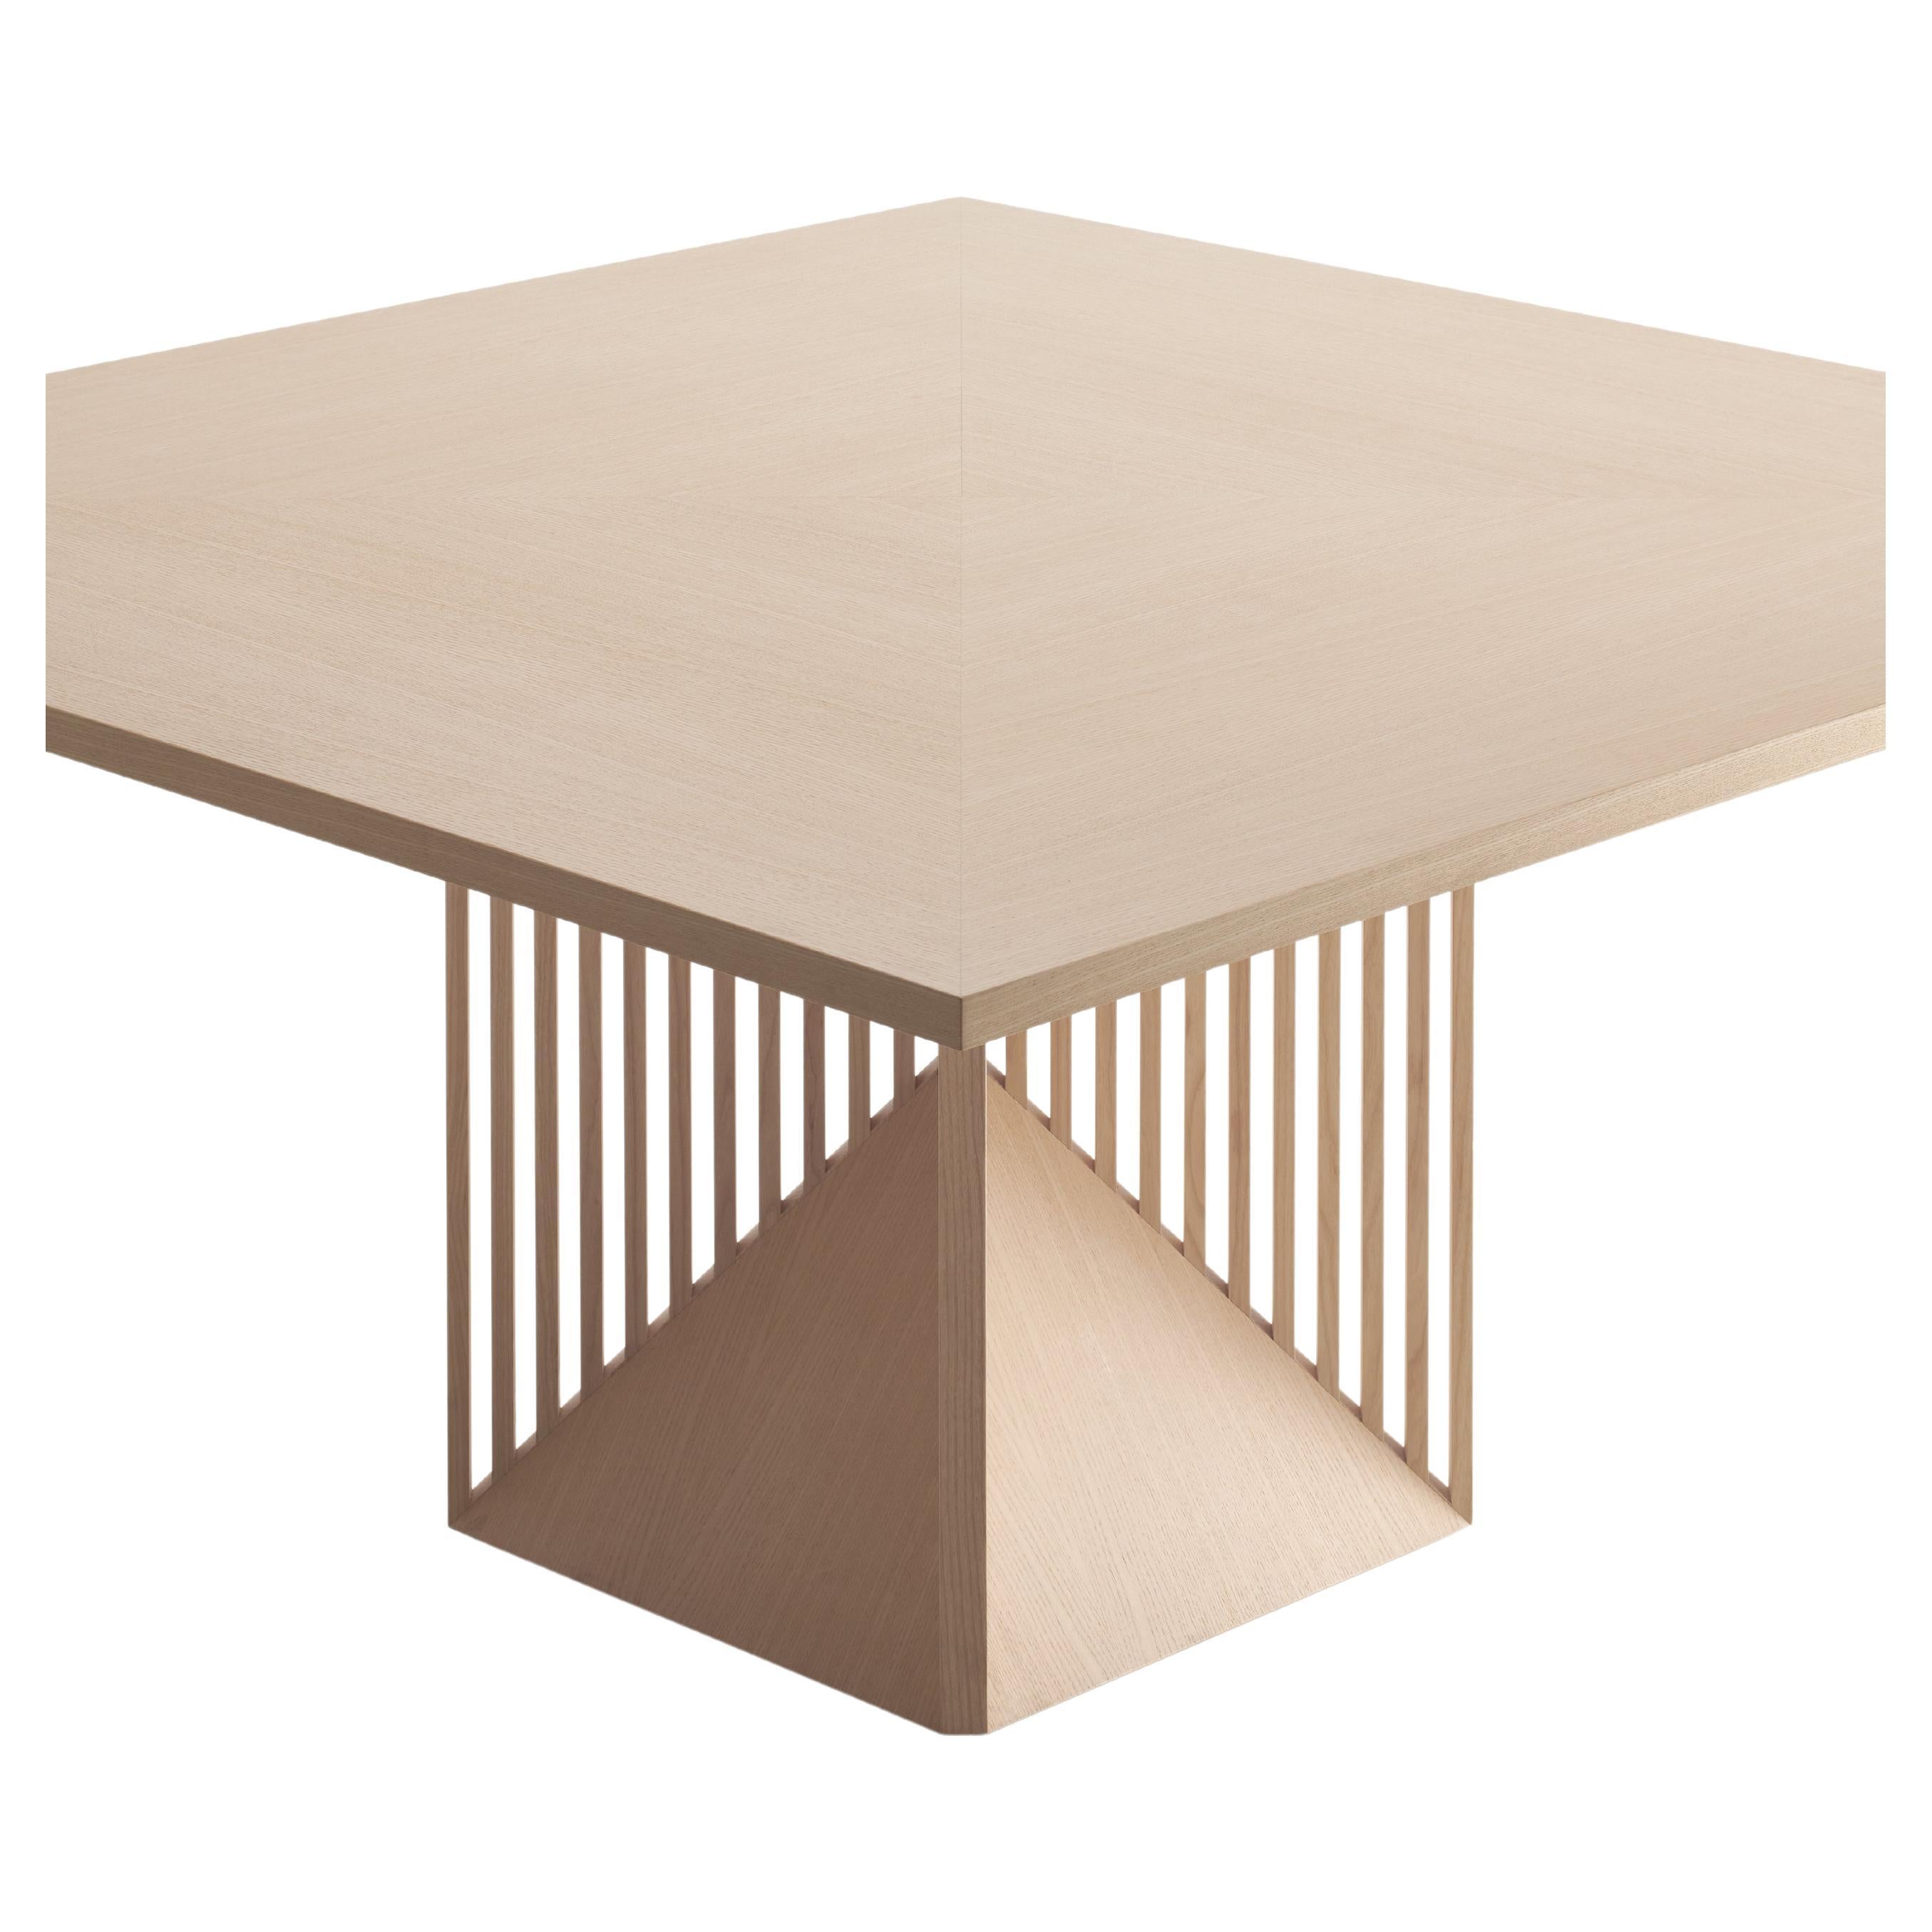 Created at the end of the 1990s by architect Gianfranco Frattini, the Maestro table combines design vision and excellence in the of Italian cabinetmaking savoir faire. Wood is Frattini’s favourite material and reveals his passion through all his